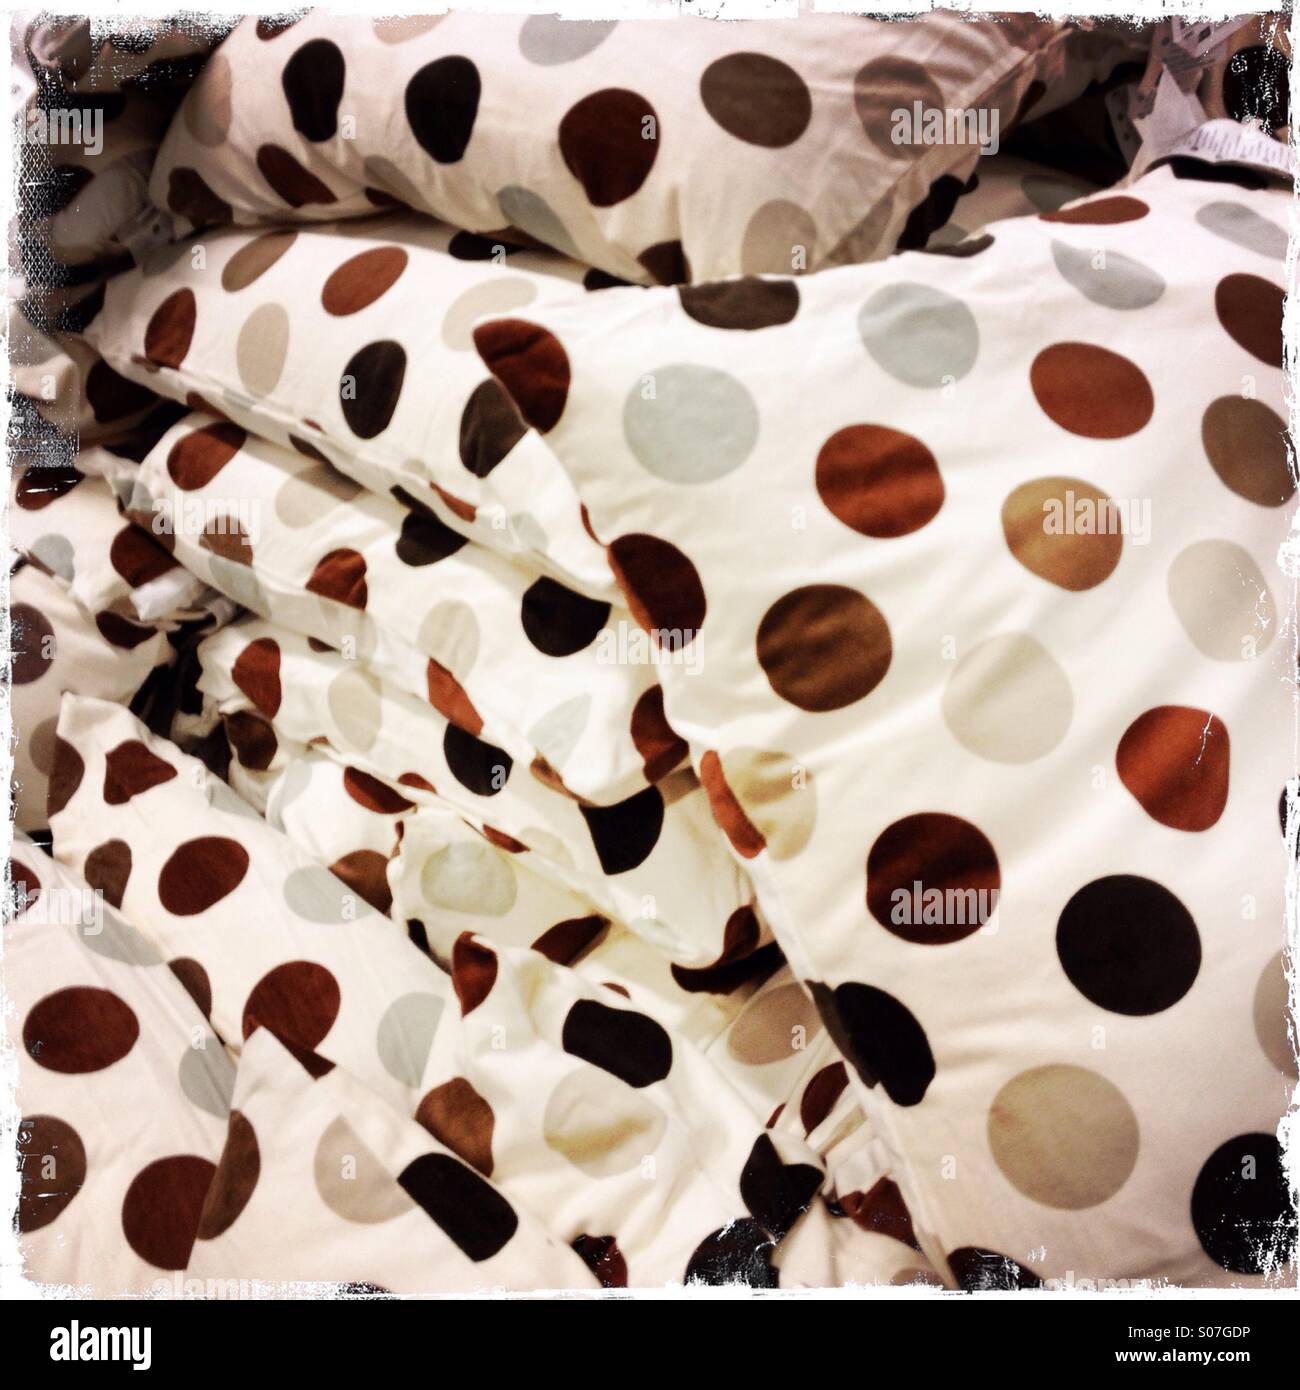 A pile of spotted cushions Stock Photo